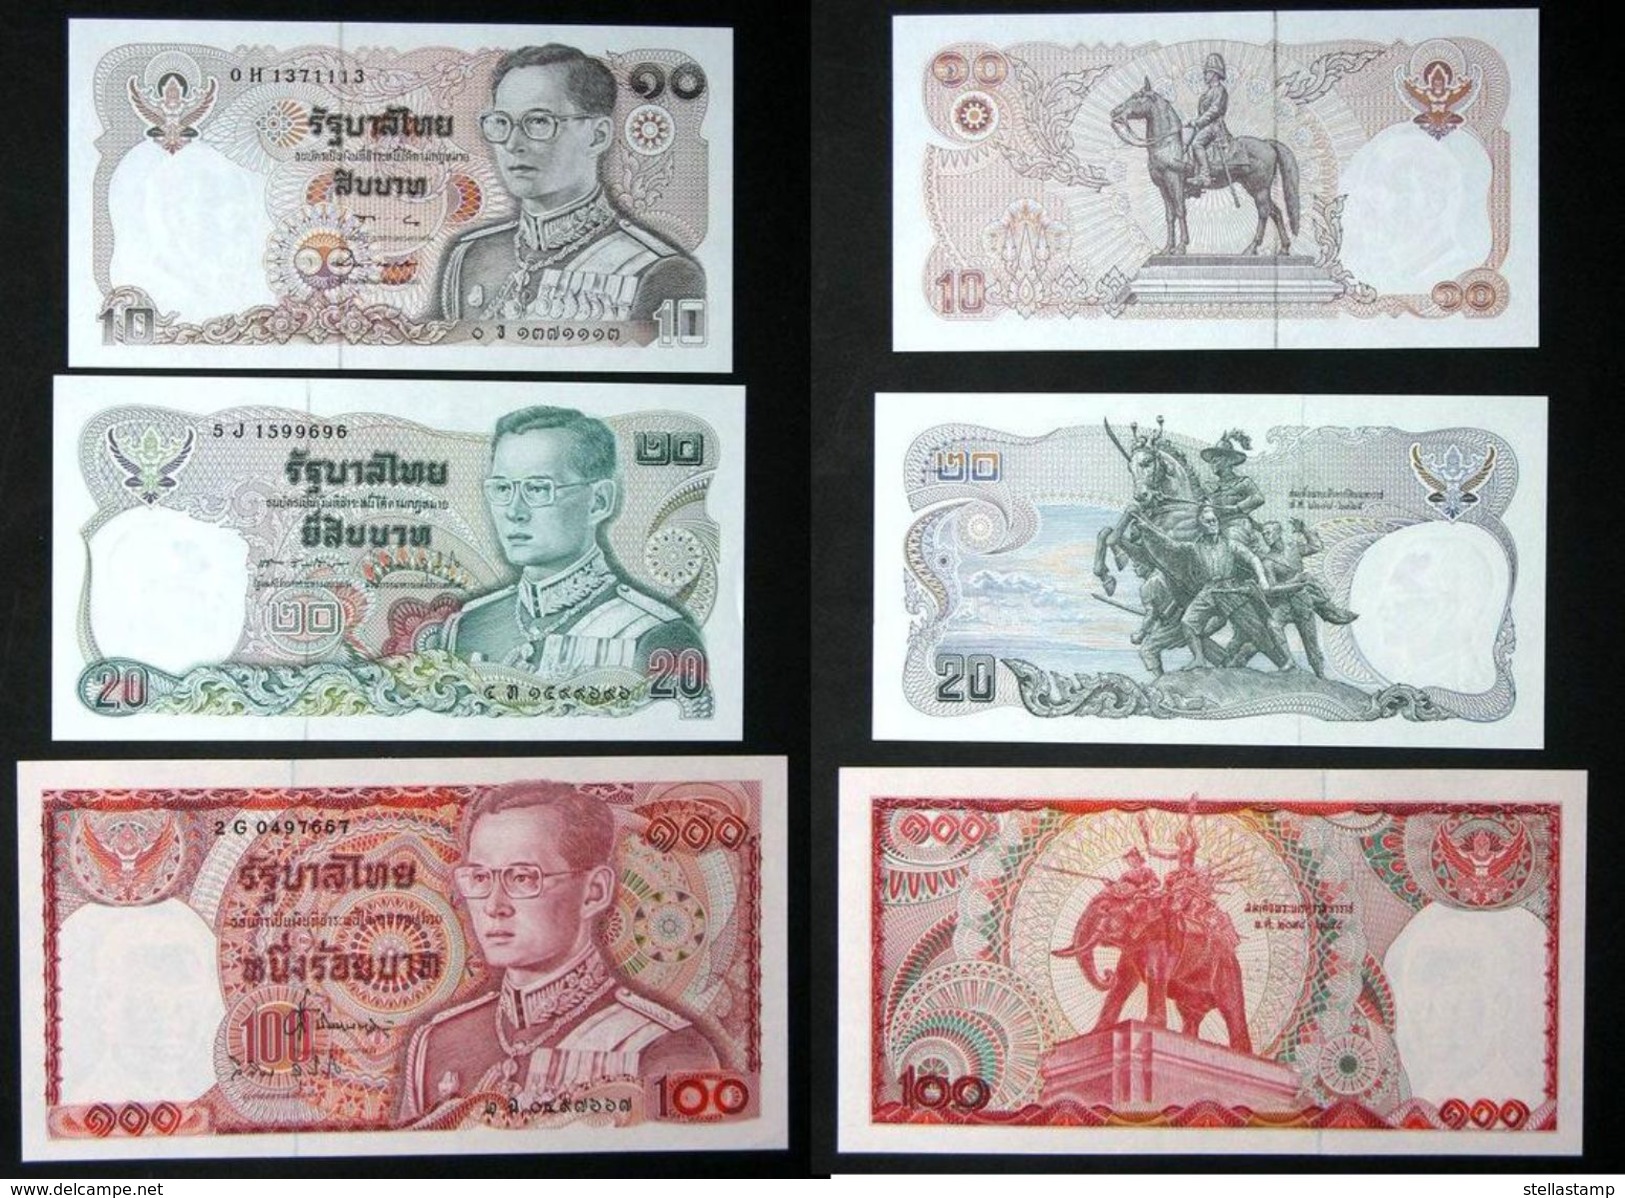 Thailand Banknote 10-20-100 Baht Series 12 Completed Set UNC - Thailand